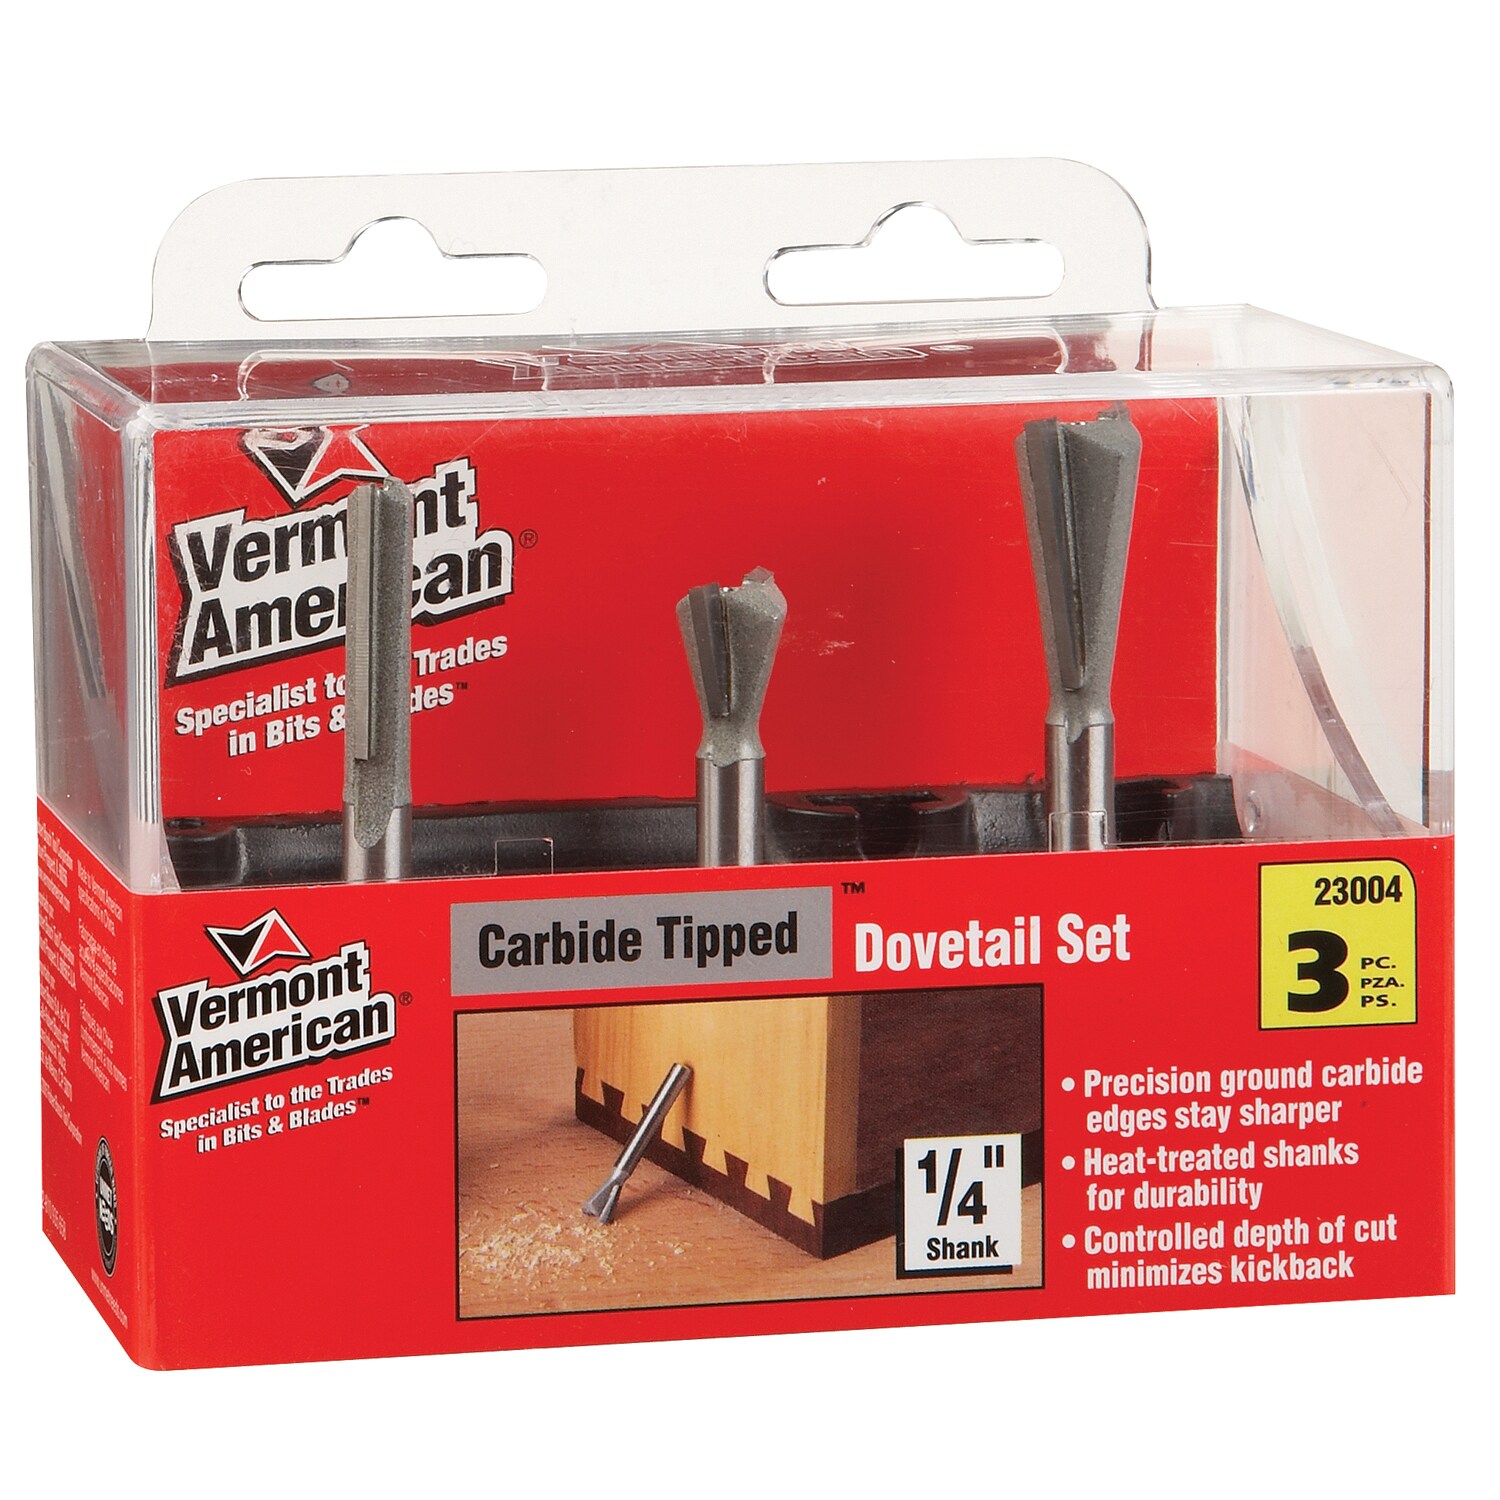 Vermont American 3 Piece Dovetail Router Bit Set  23004 - image 2 of 2